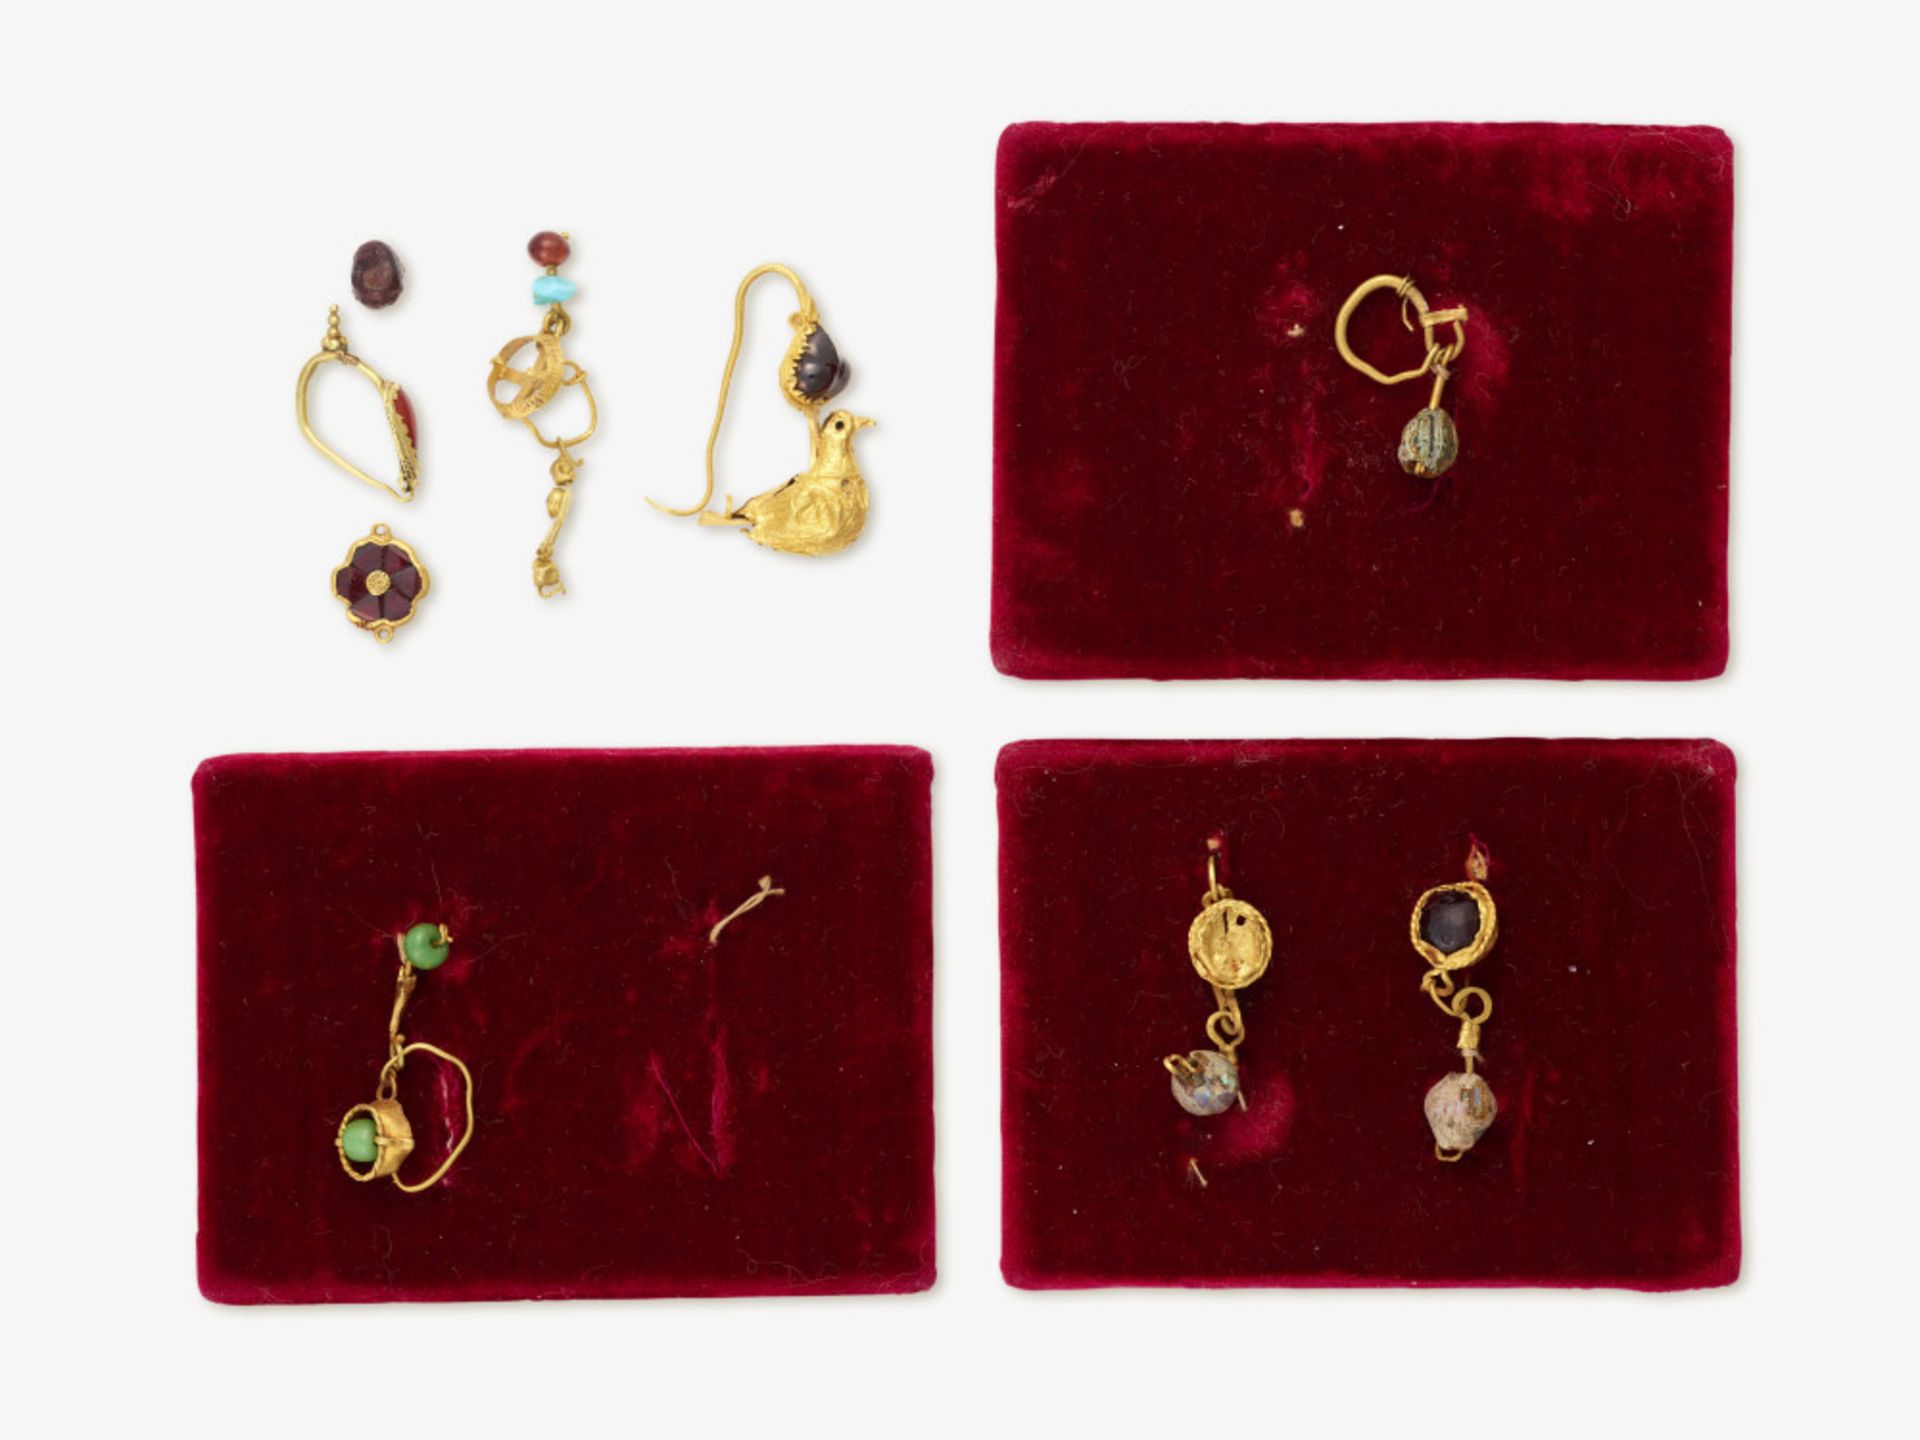 A pair of earrings and five single earrings with two loose earring pieces - Hellenistic, 4th - 2nd c